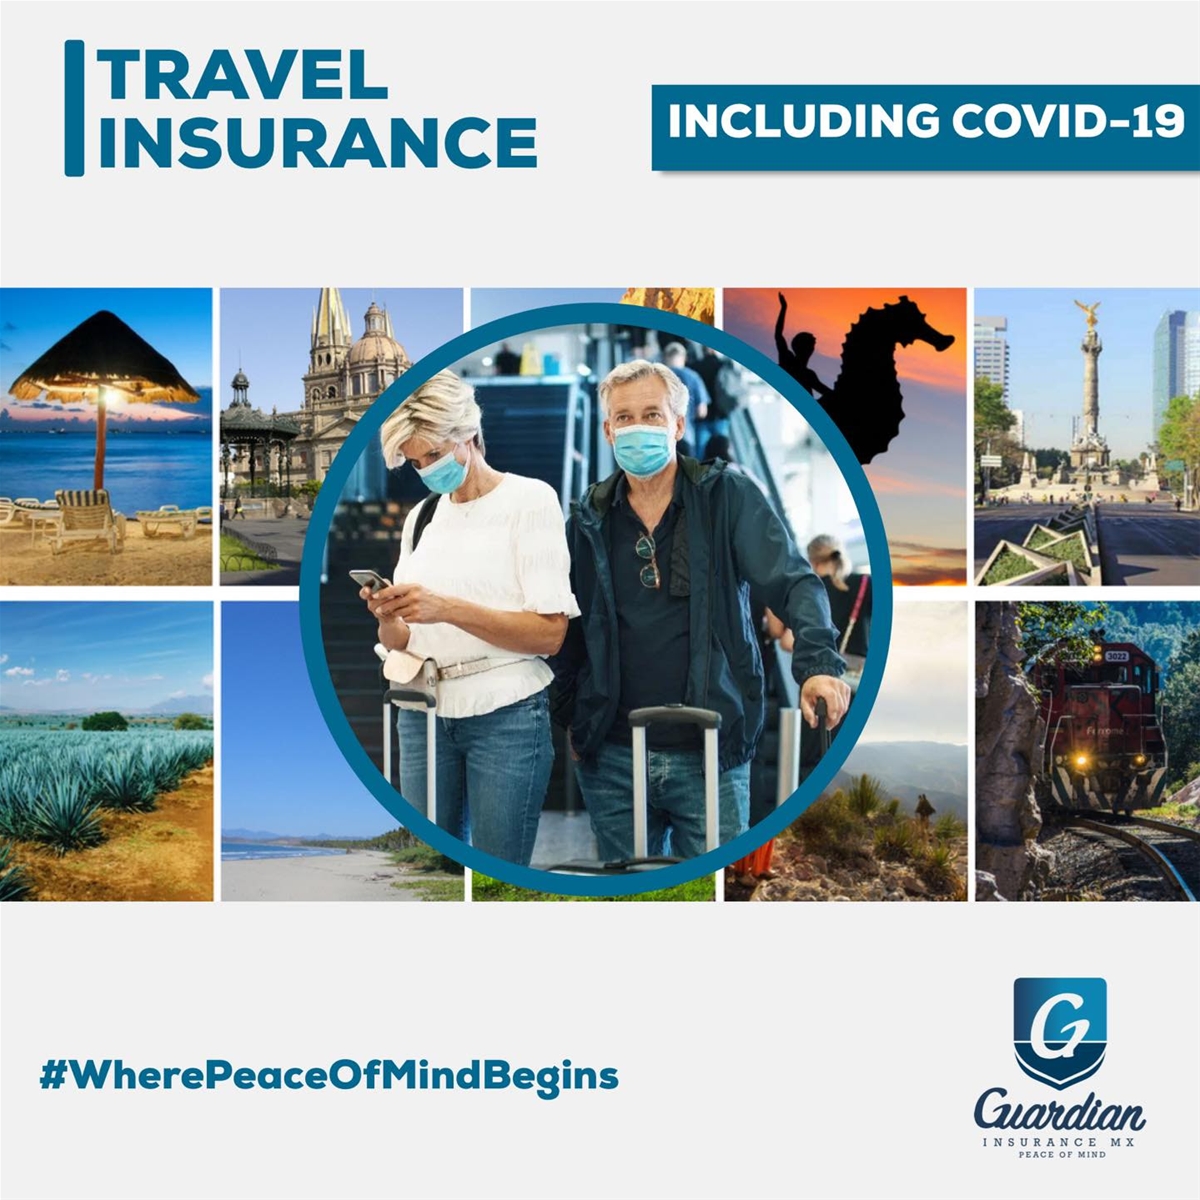 holiday travel insurance including covid cover